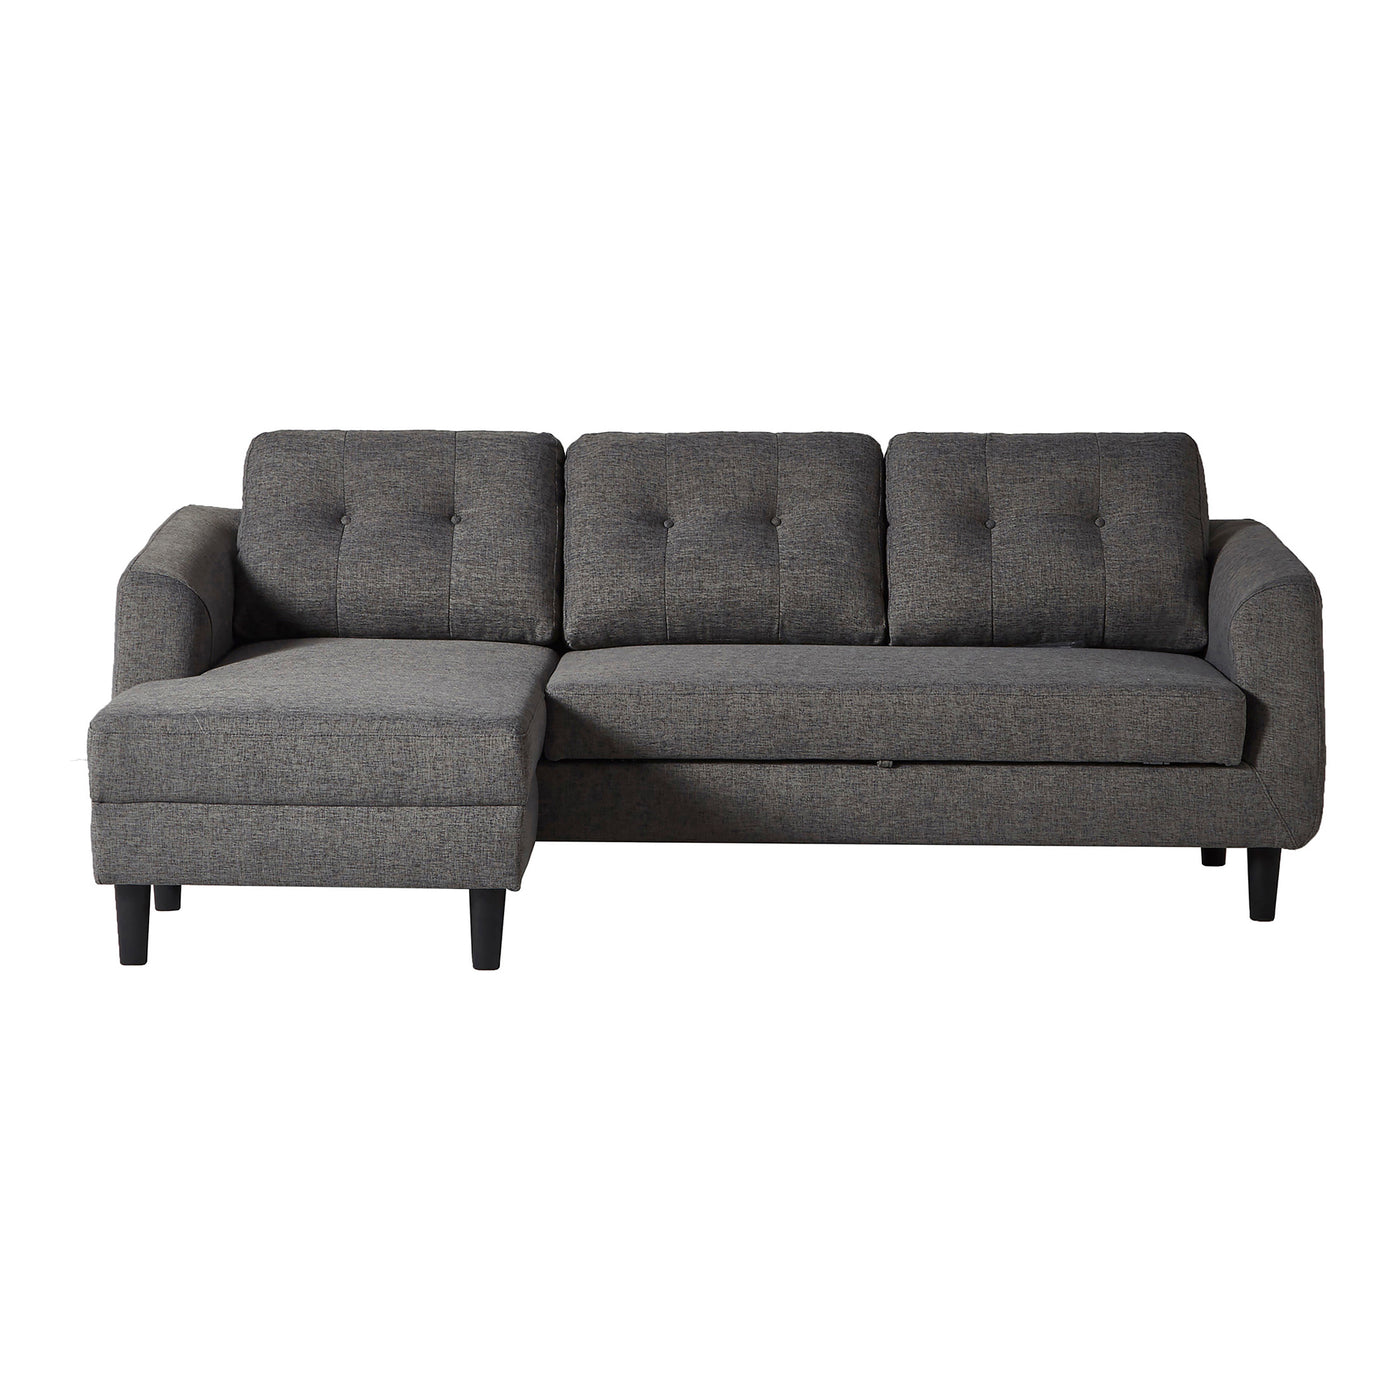 BELAGIO LEFT FACING SOFA BED WITH CHAISE